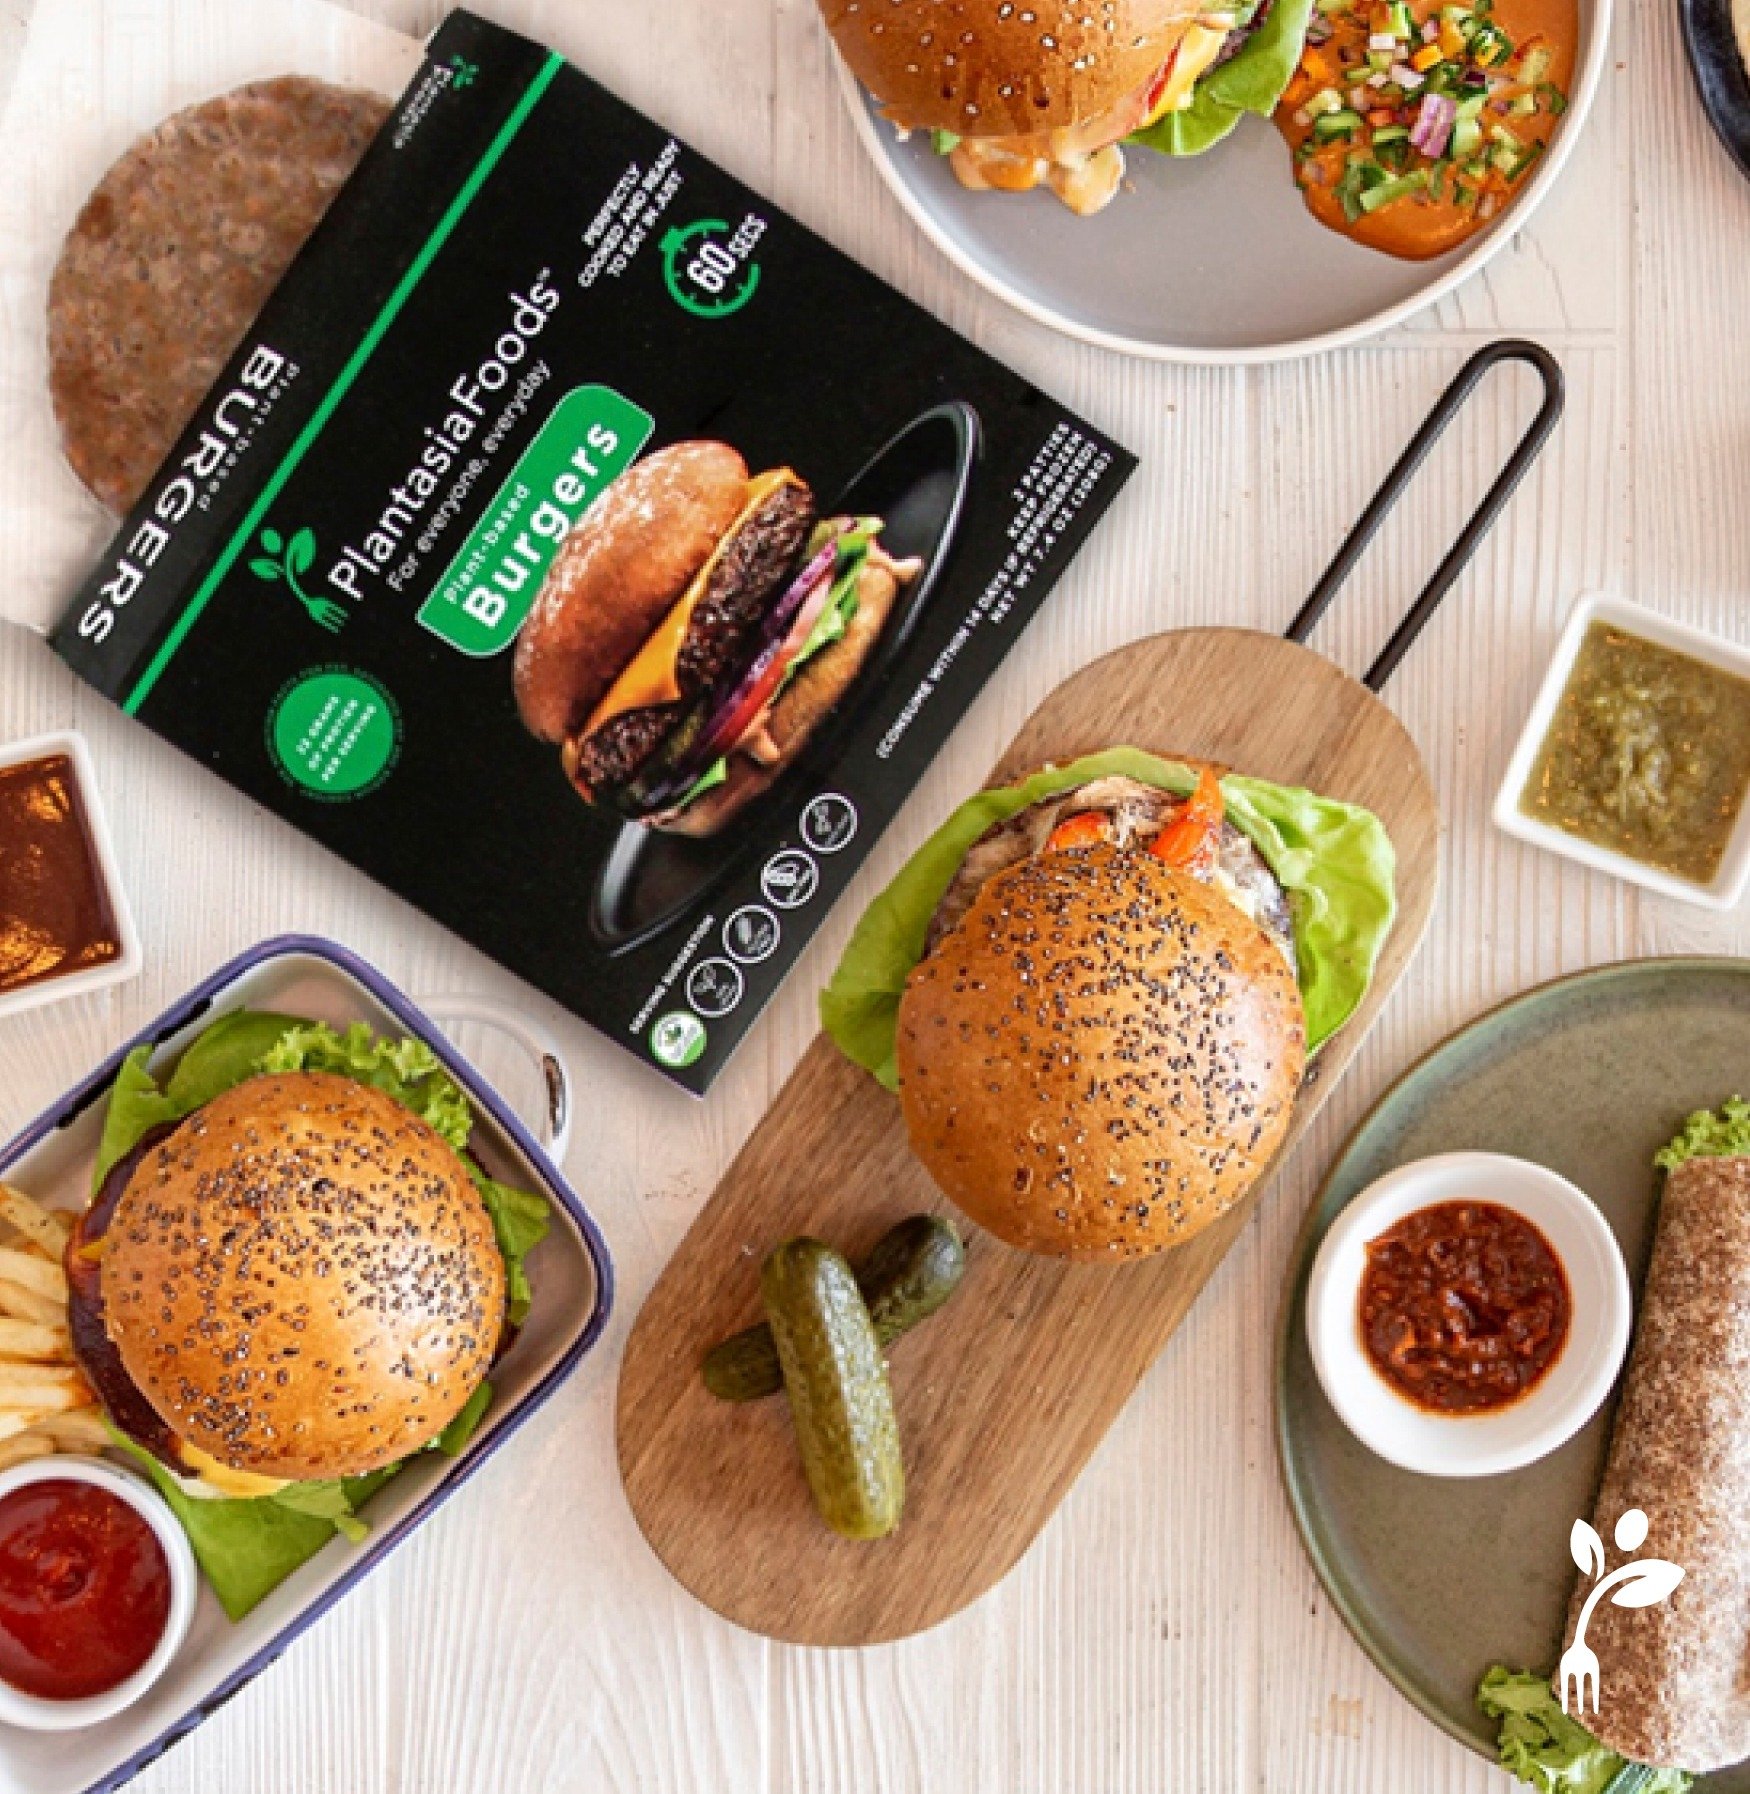 🌱🍔 This week, savor the plant-based perfection of our burgers! Juicy, flavorful, 100% Plant-based, convenient, and delicious for everyone! Bite into a better future with PlantasiaFoods! #PlantBasedDelights #BurgerBliss #HappyMonday